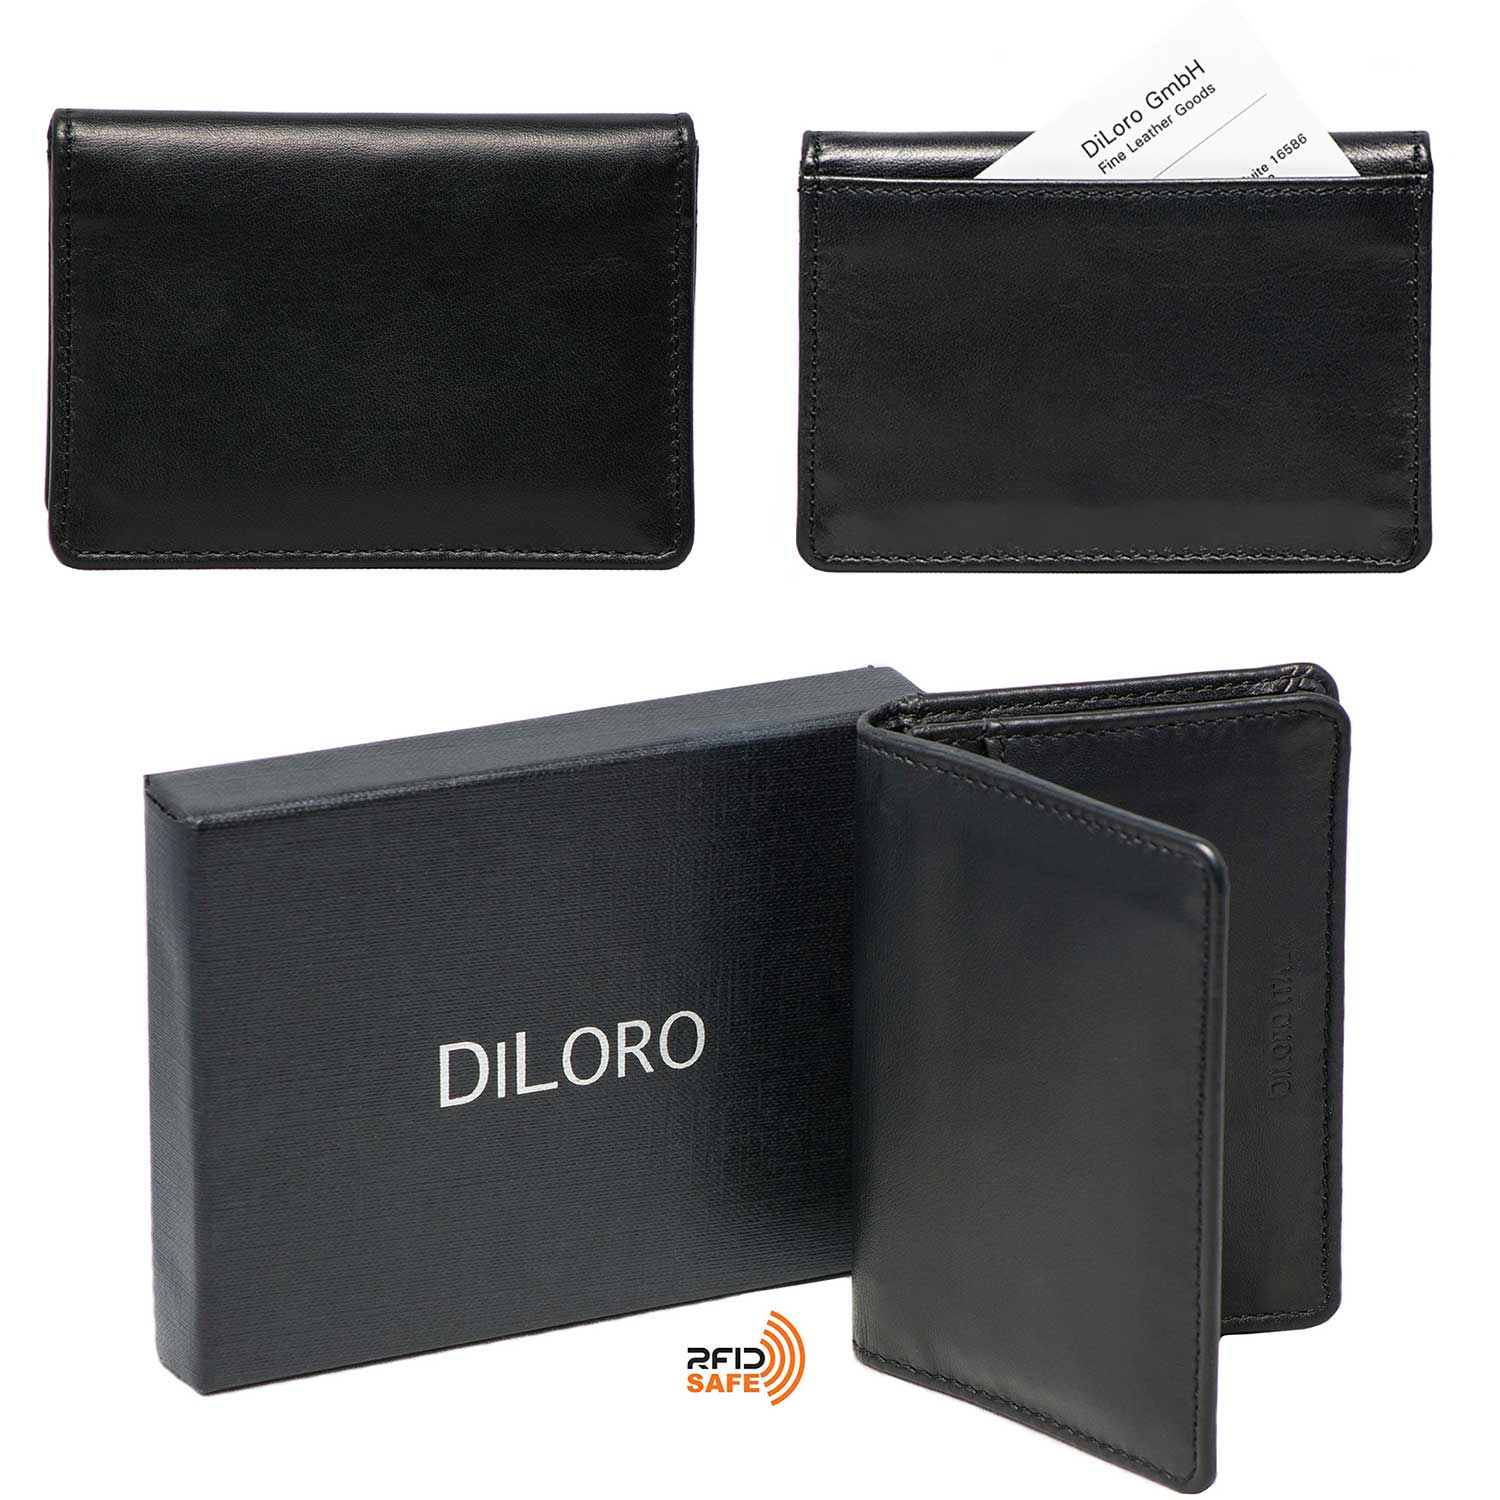 DiLoro Travel Leather Business Card Wallet Black - Front & Back View with Gift Box